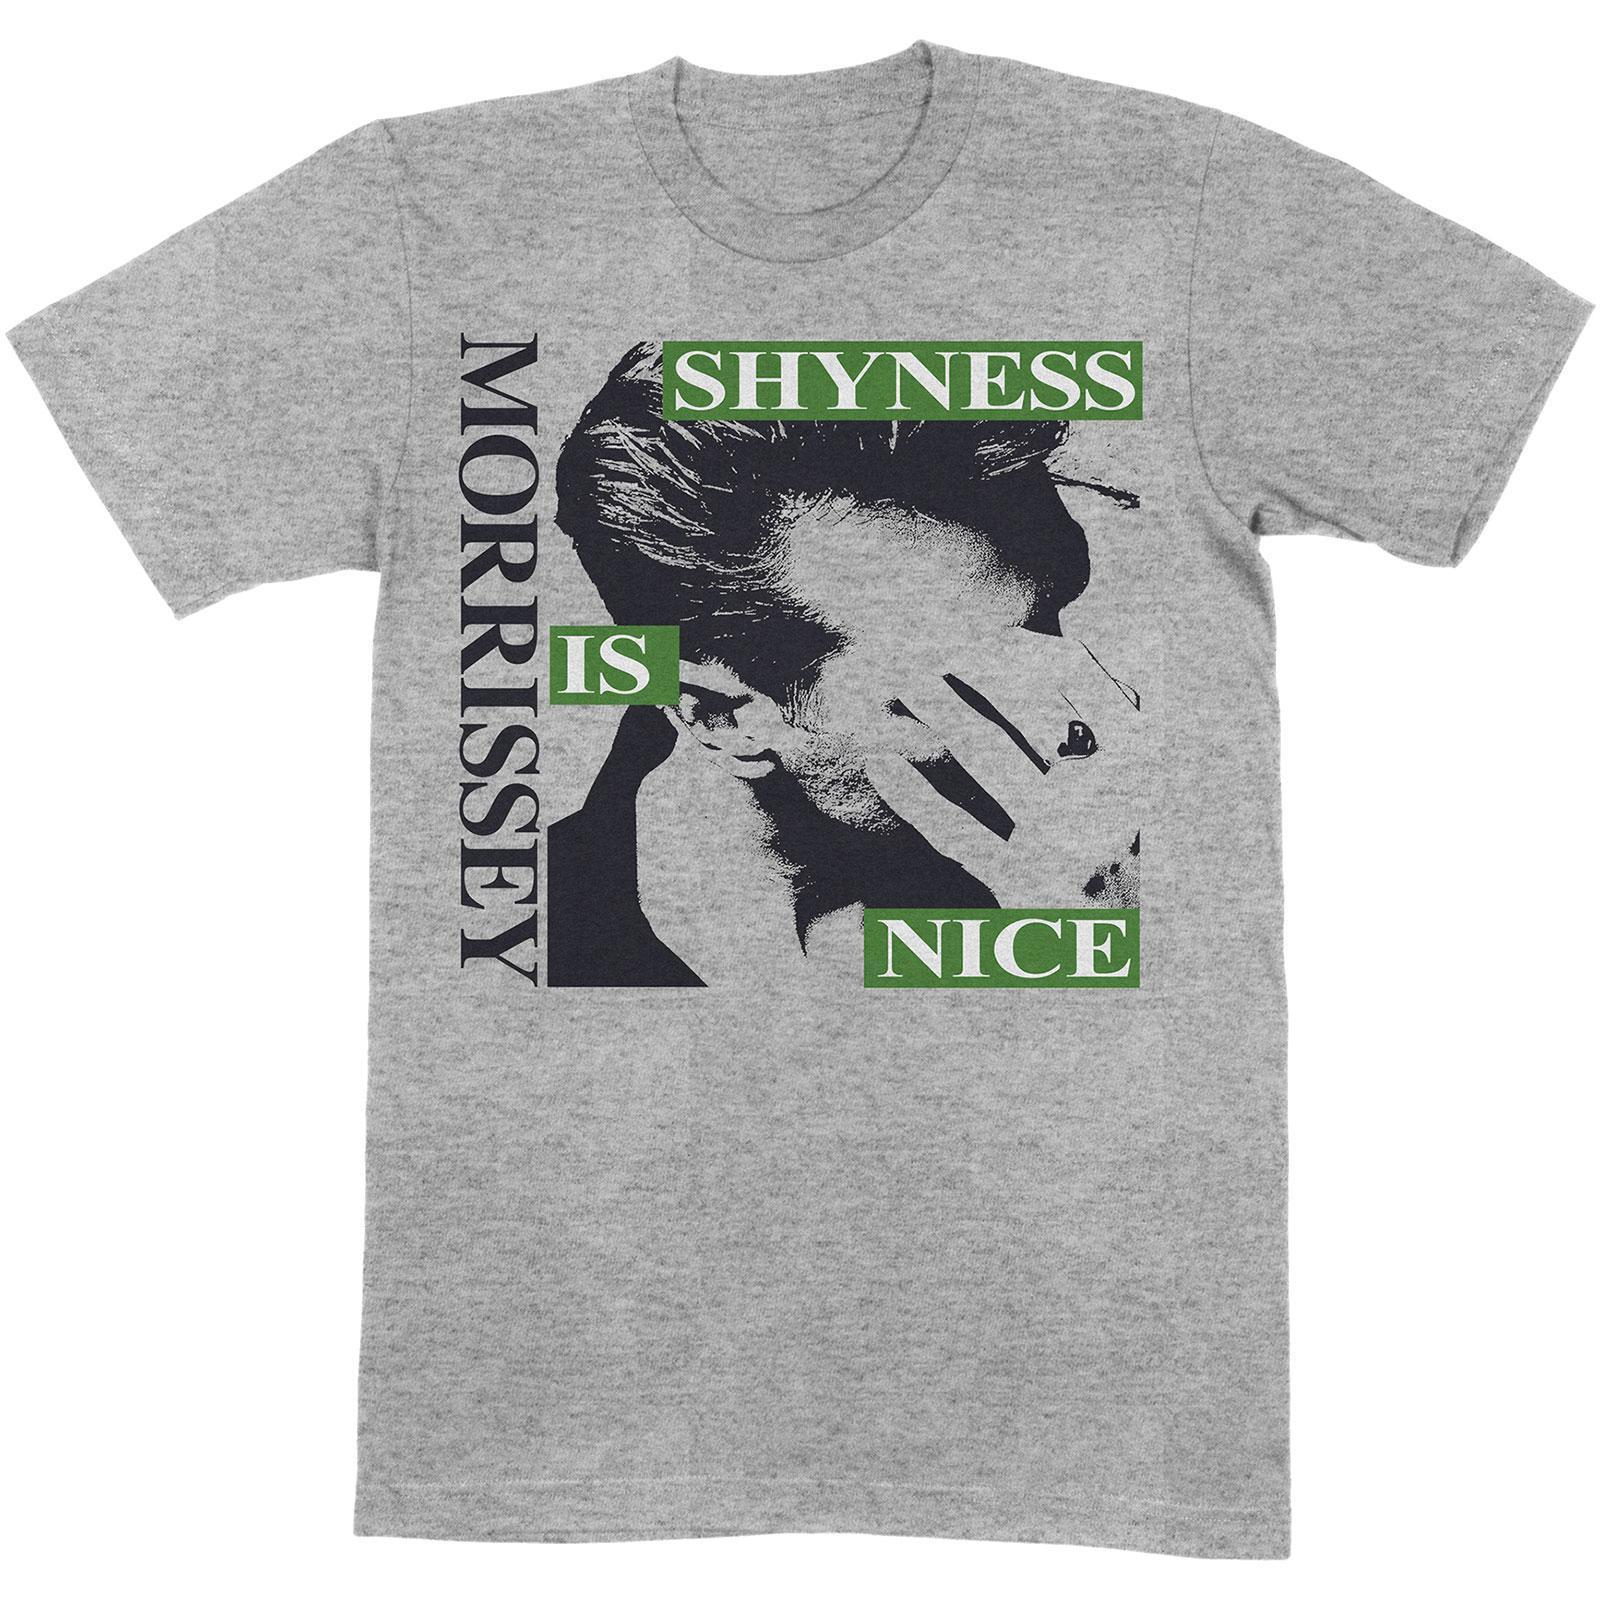 Morrissey Unisex Adult Shyness Is Nice Cotton T-Shirt (Grey) (M)